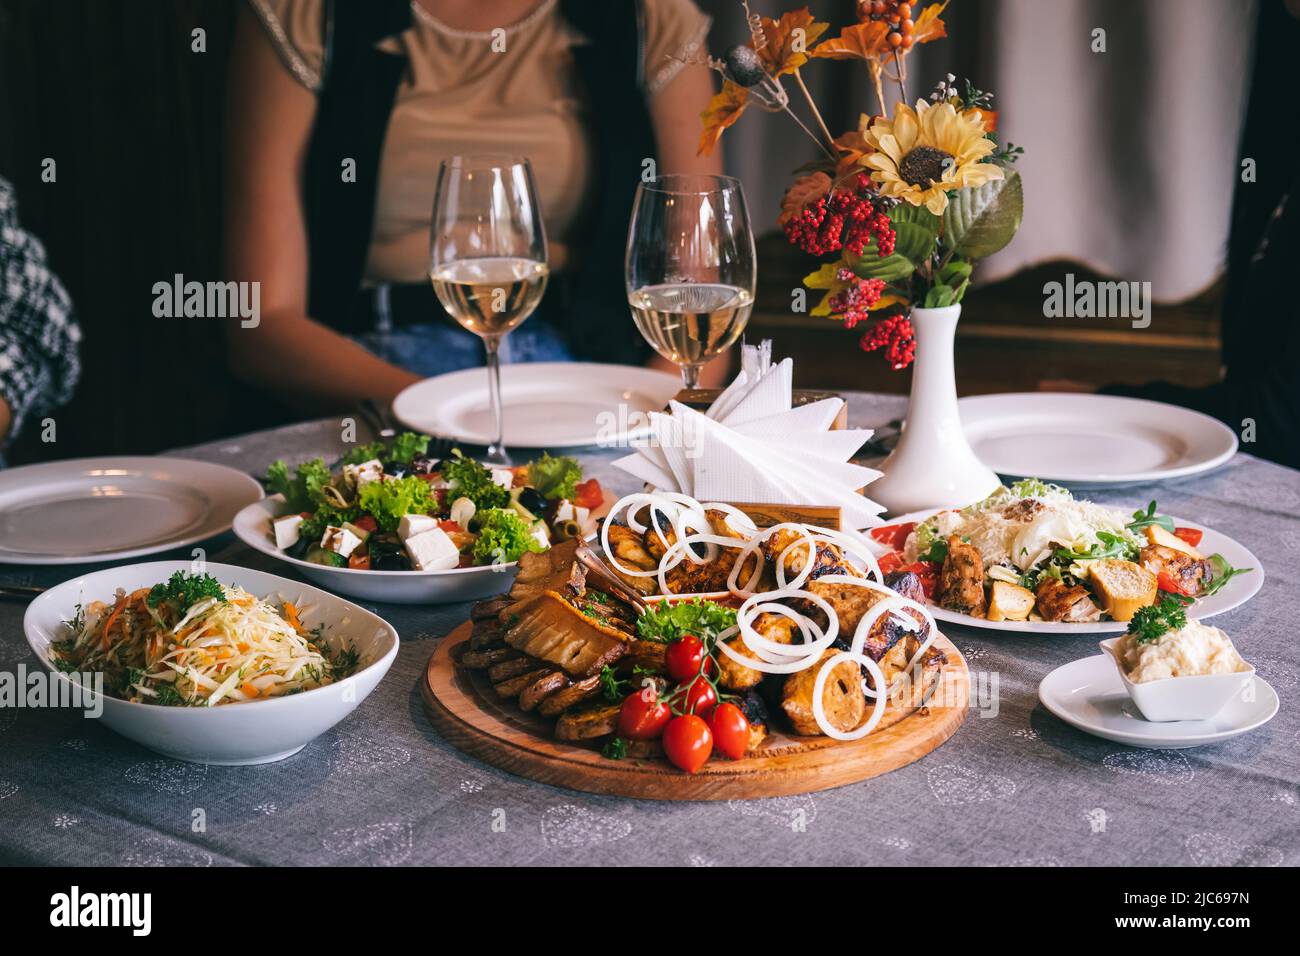 Plate with barbecue, sauce and salads. Dinner at the restaurant. In the background are glasses of white wine. Stock Photo